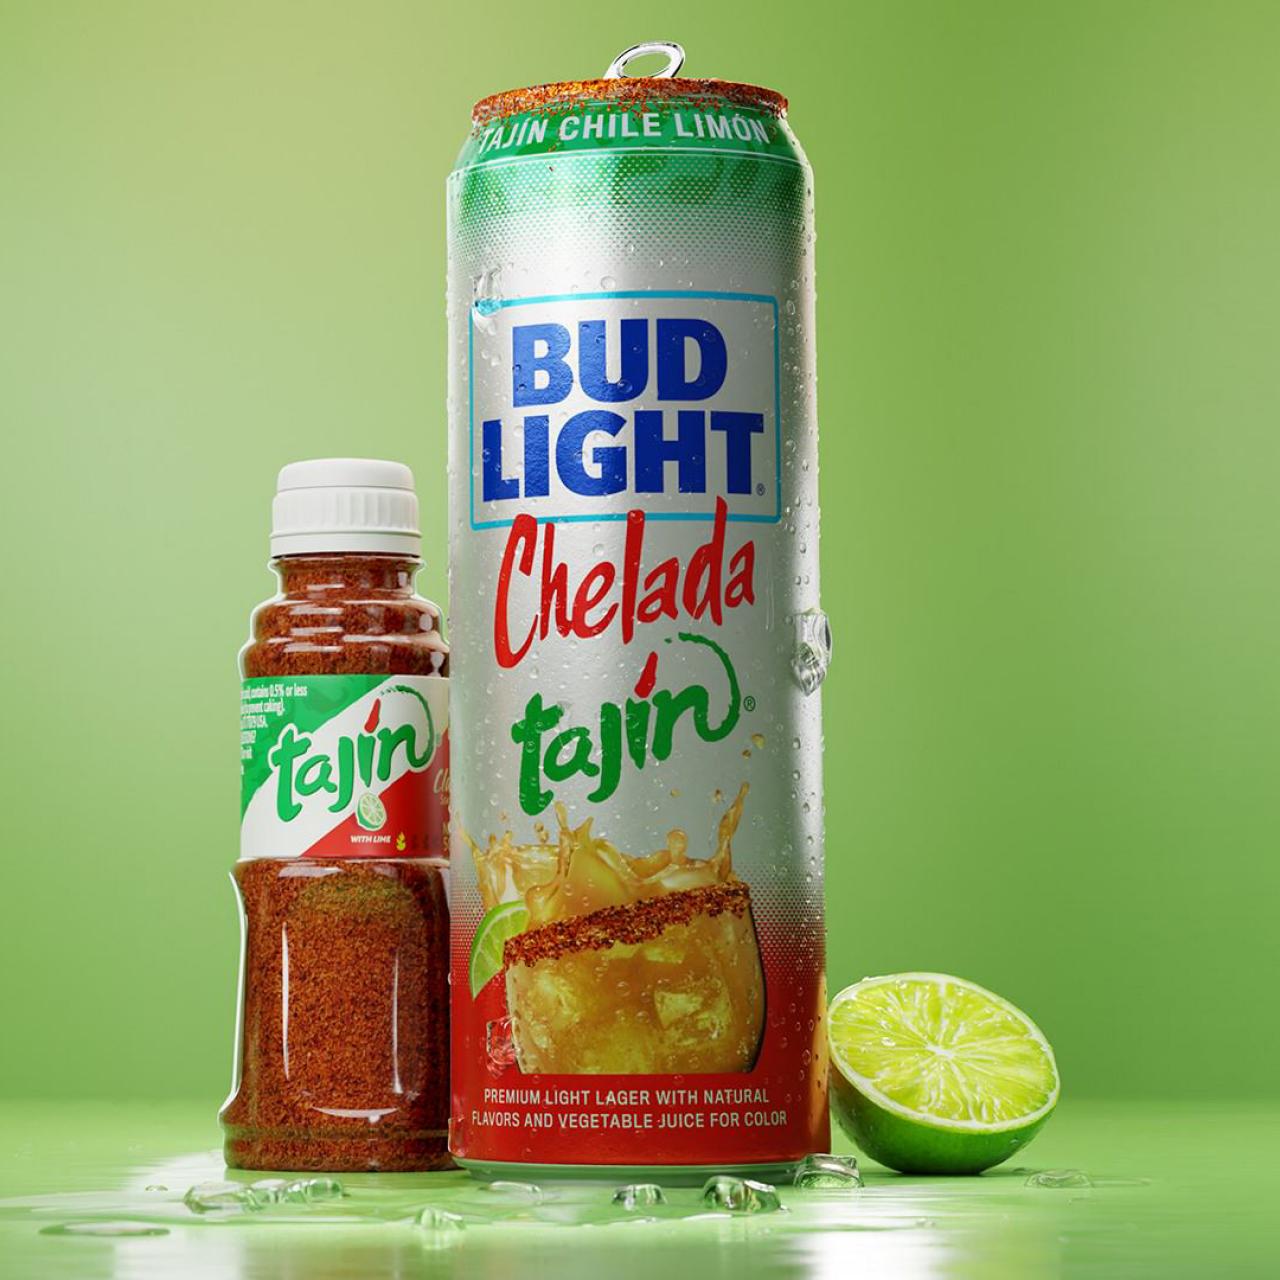 What Does Bud Light Chelada Tajín Chile Limón Taste Like?, FN Dish -  Behind-the-Scenes, Food Trends, and Best Recipes : Food Network